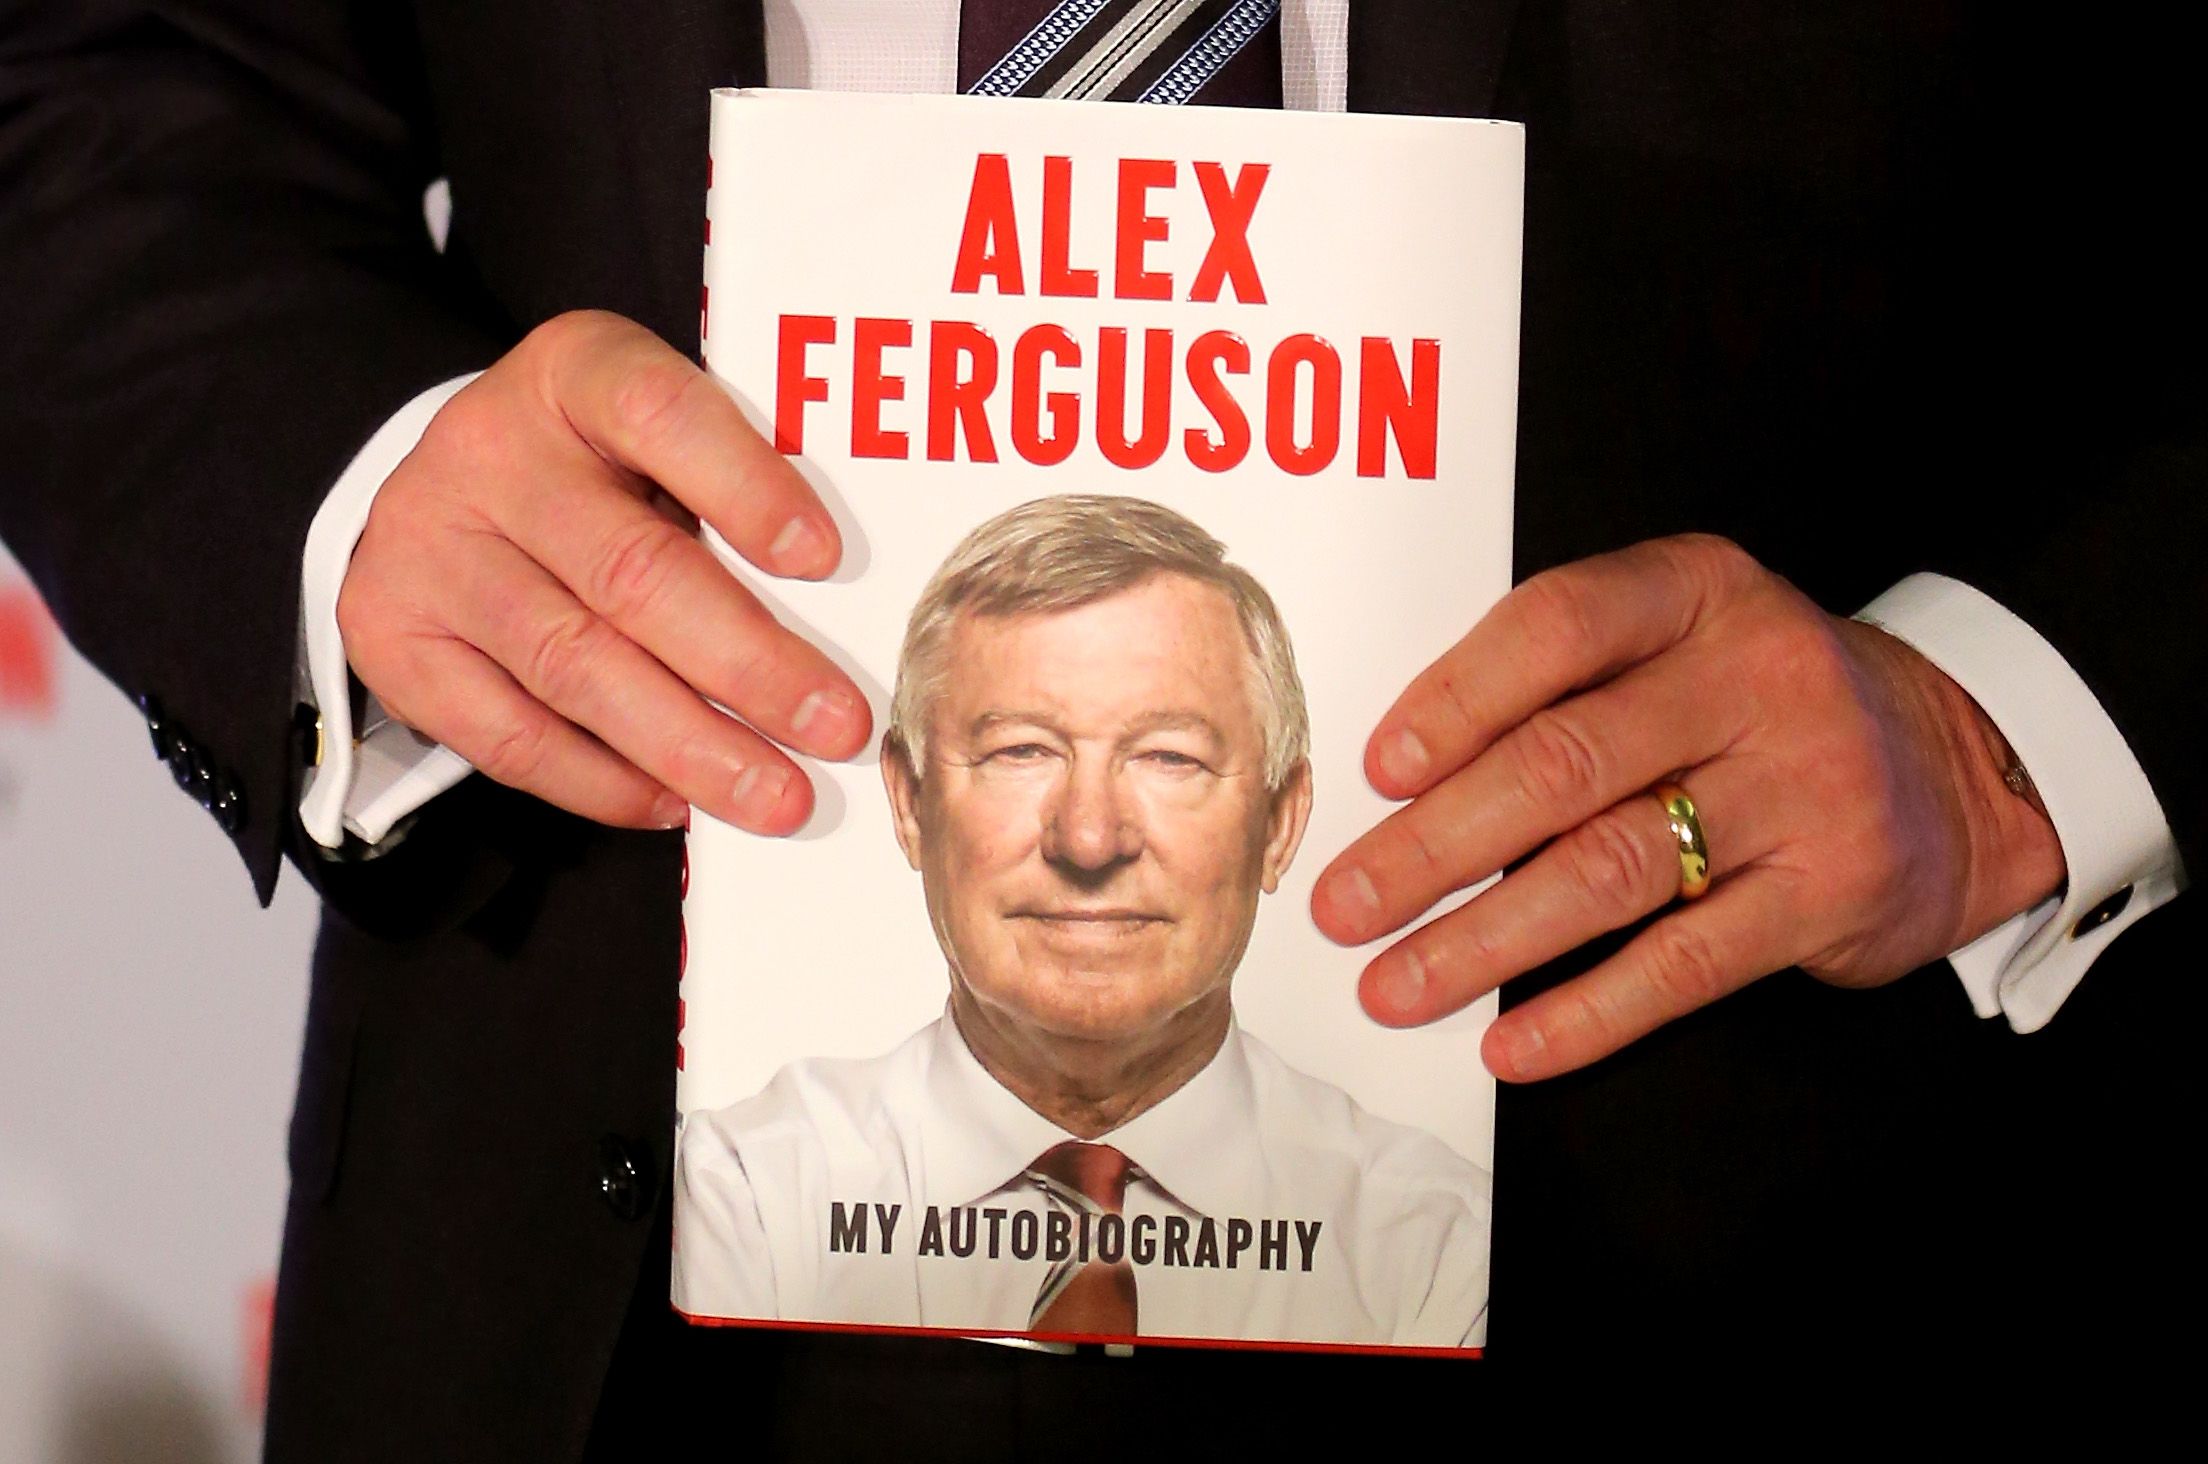 Alex Ferguson's book: 10 things you need to know | CNN